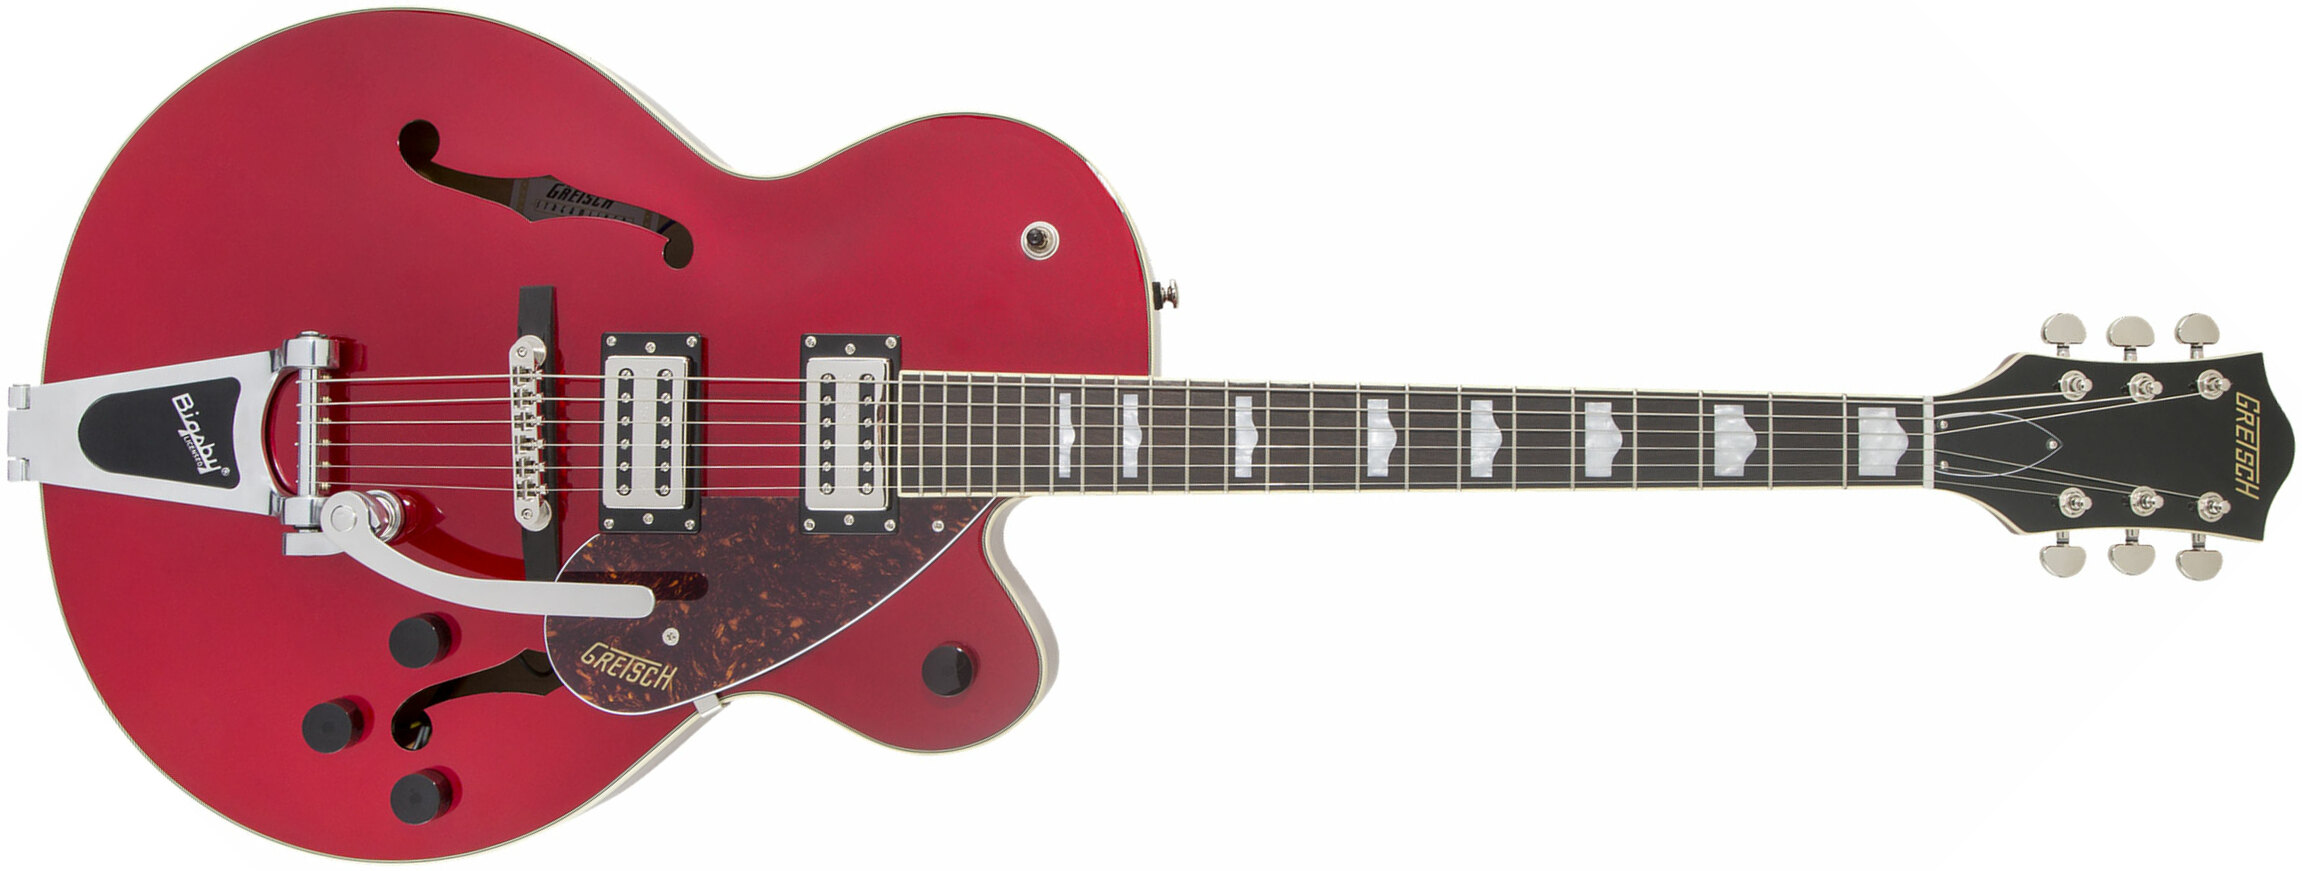 Gretsch G2420t Streamliner Hollow Body Bigsby Hh Trem Lau - Candy Apple Red - Semi-Hollow E-Gitarre - Main picture